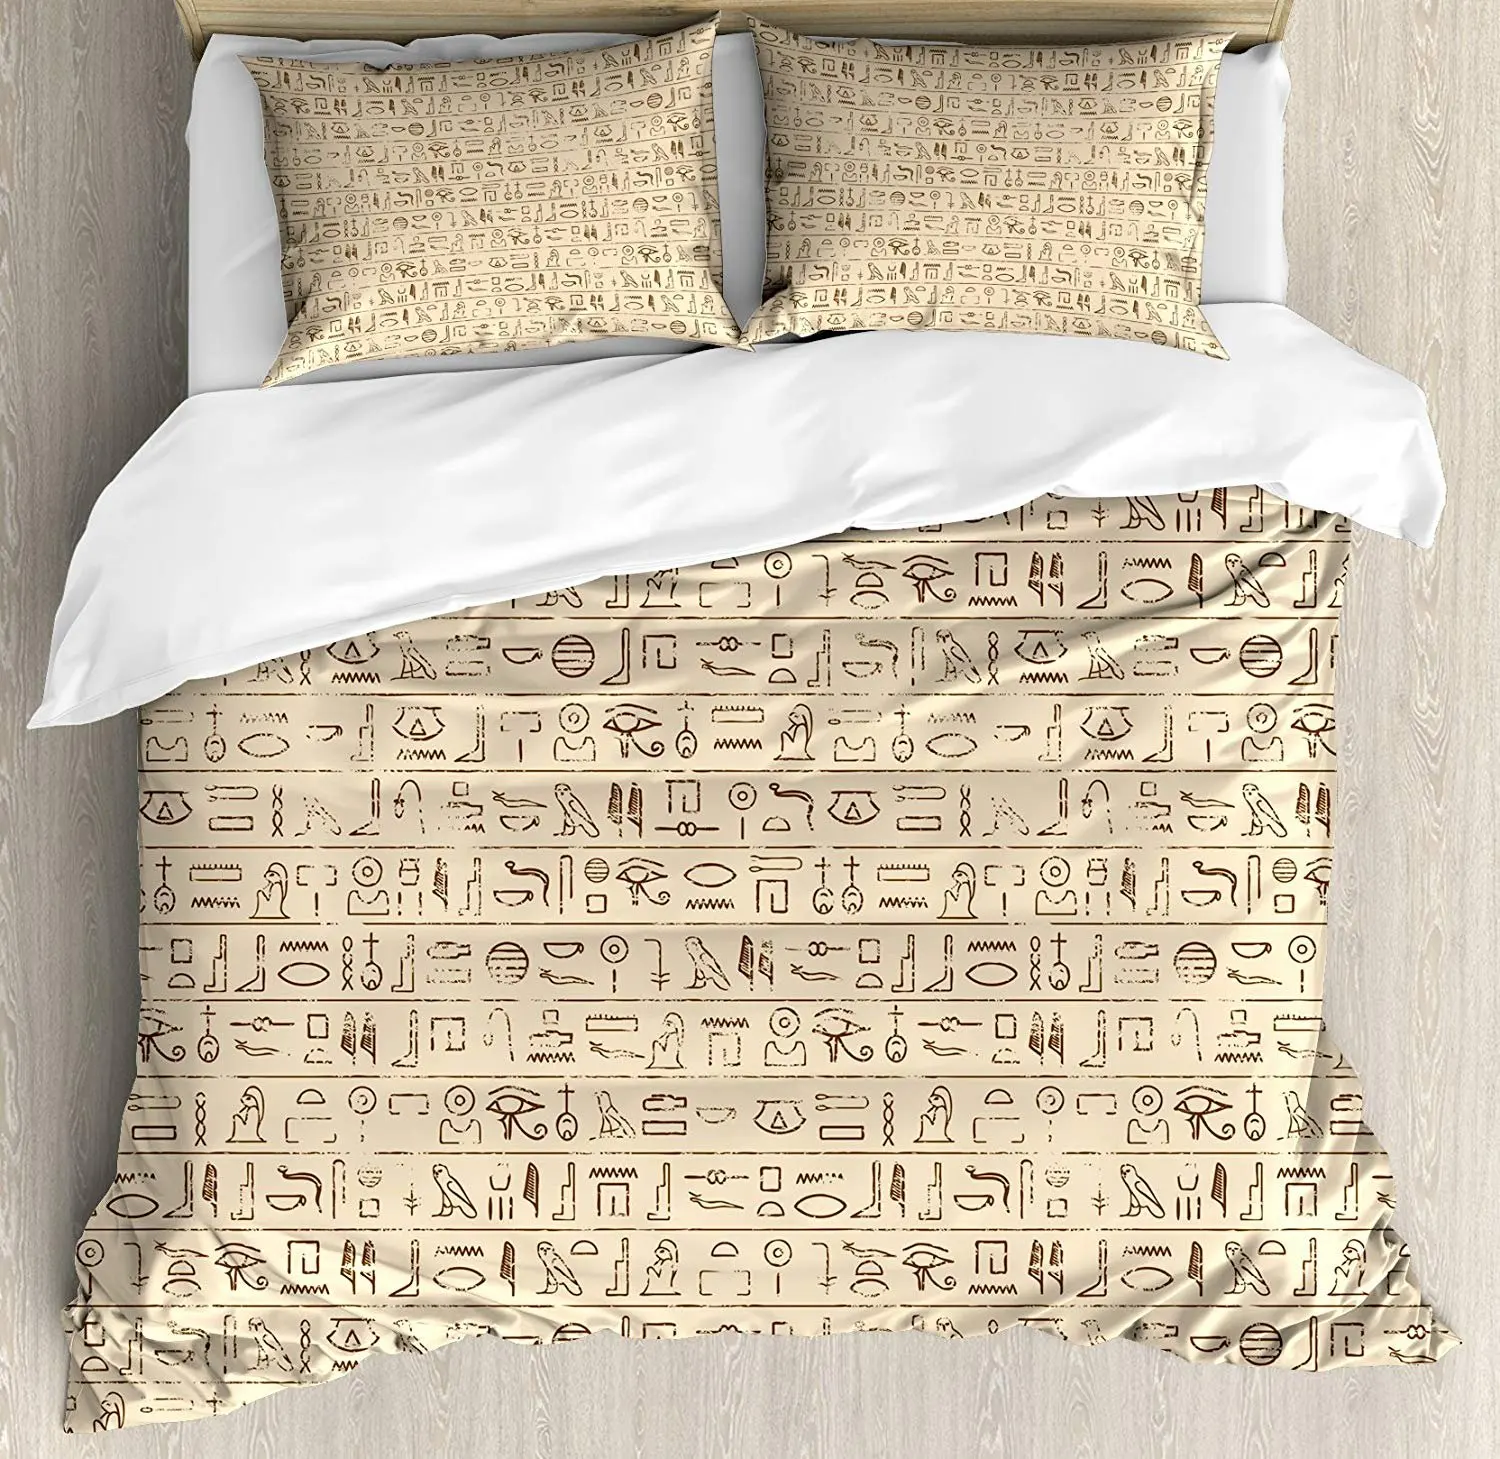 

Egyptian Bedding Set Old Dated Hieroglyphics Ancient Language Hand Written Style Borders with Worn Look Duvet Cover Pillowcase